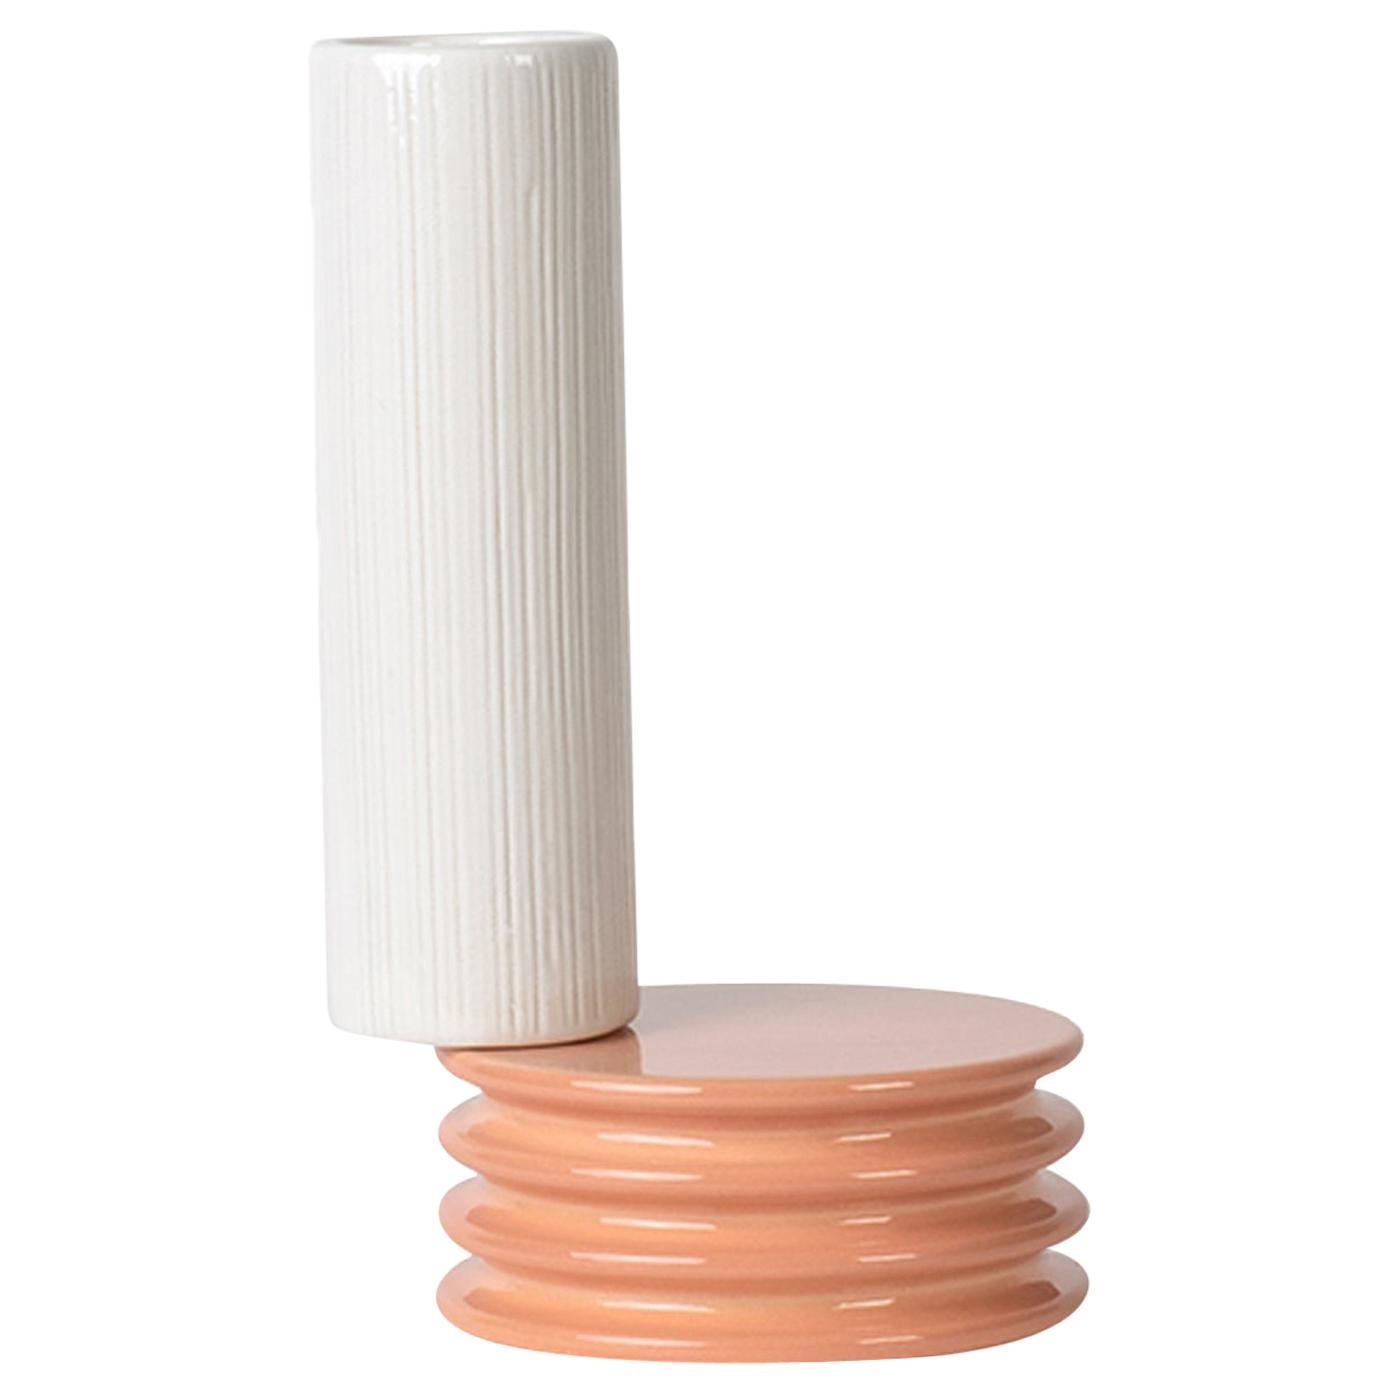 2-Element White and Terracotta Vase by Quincoces-Dragò 